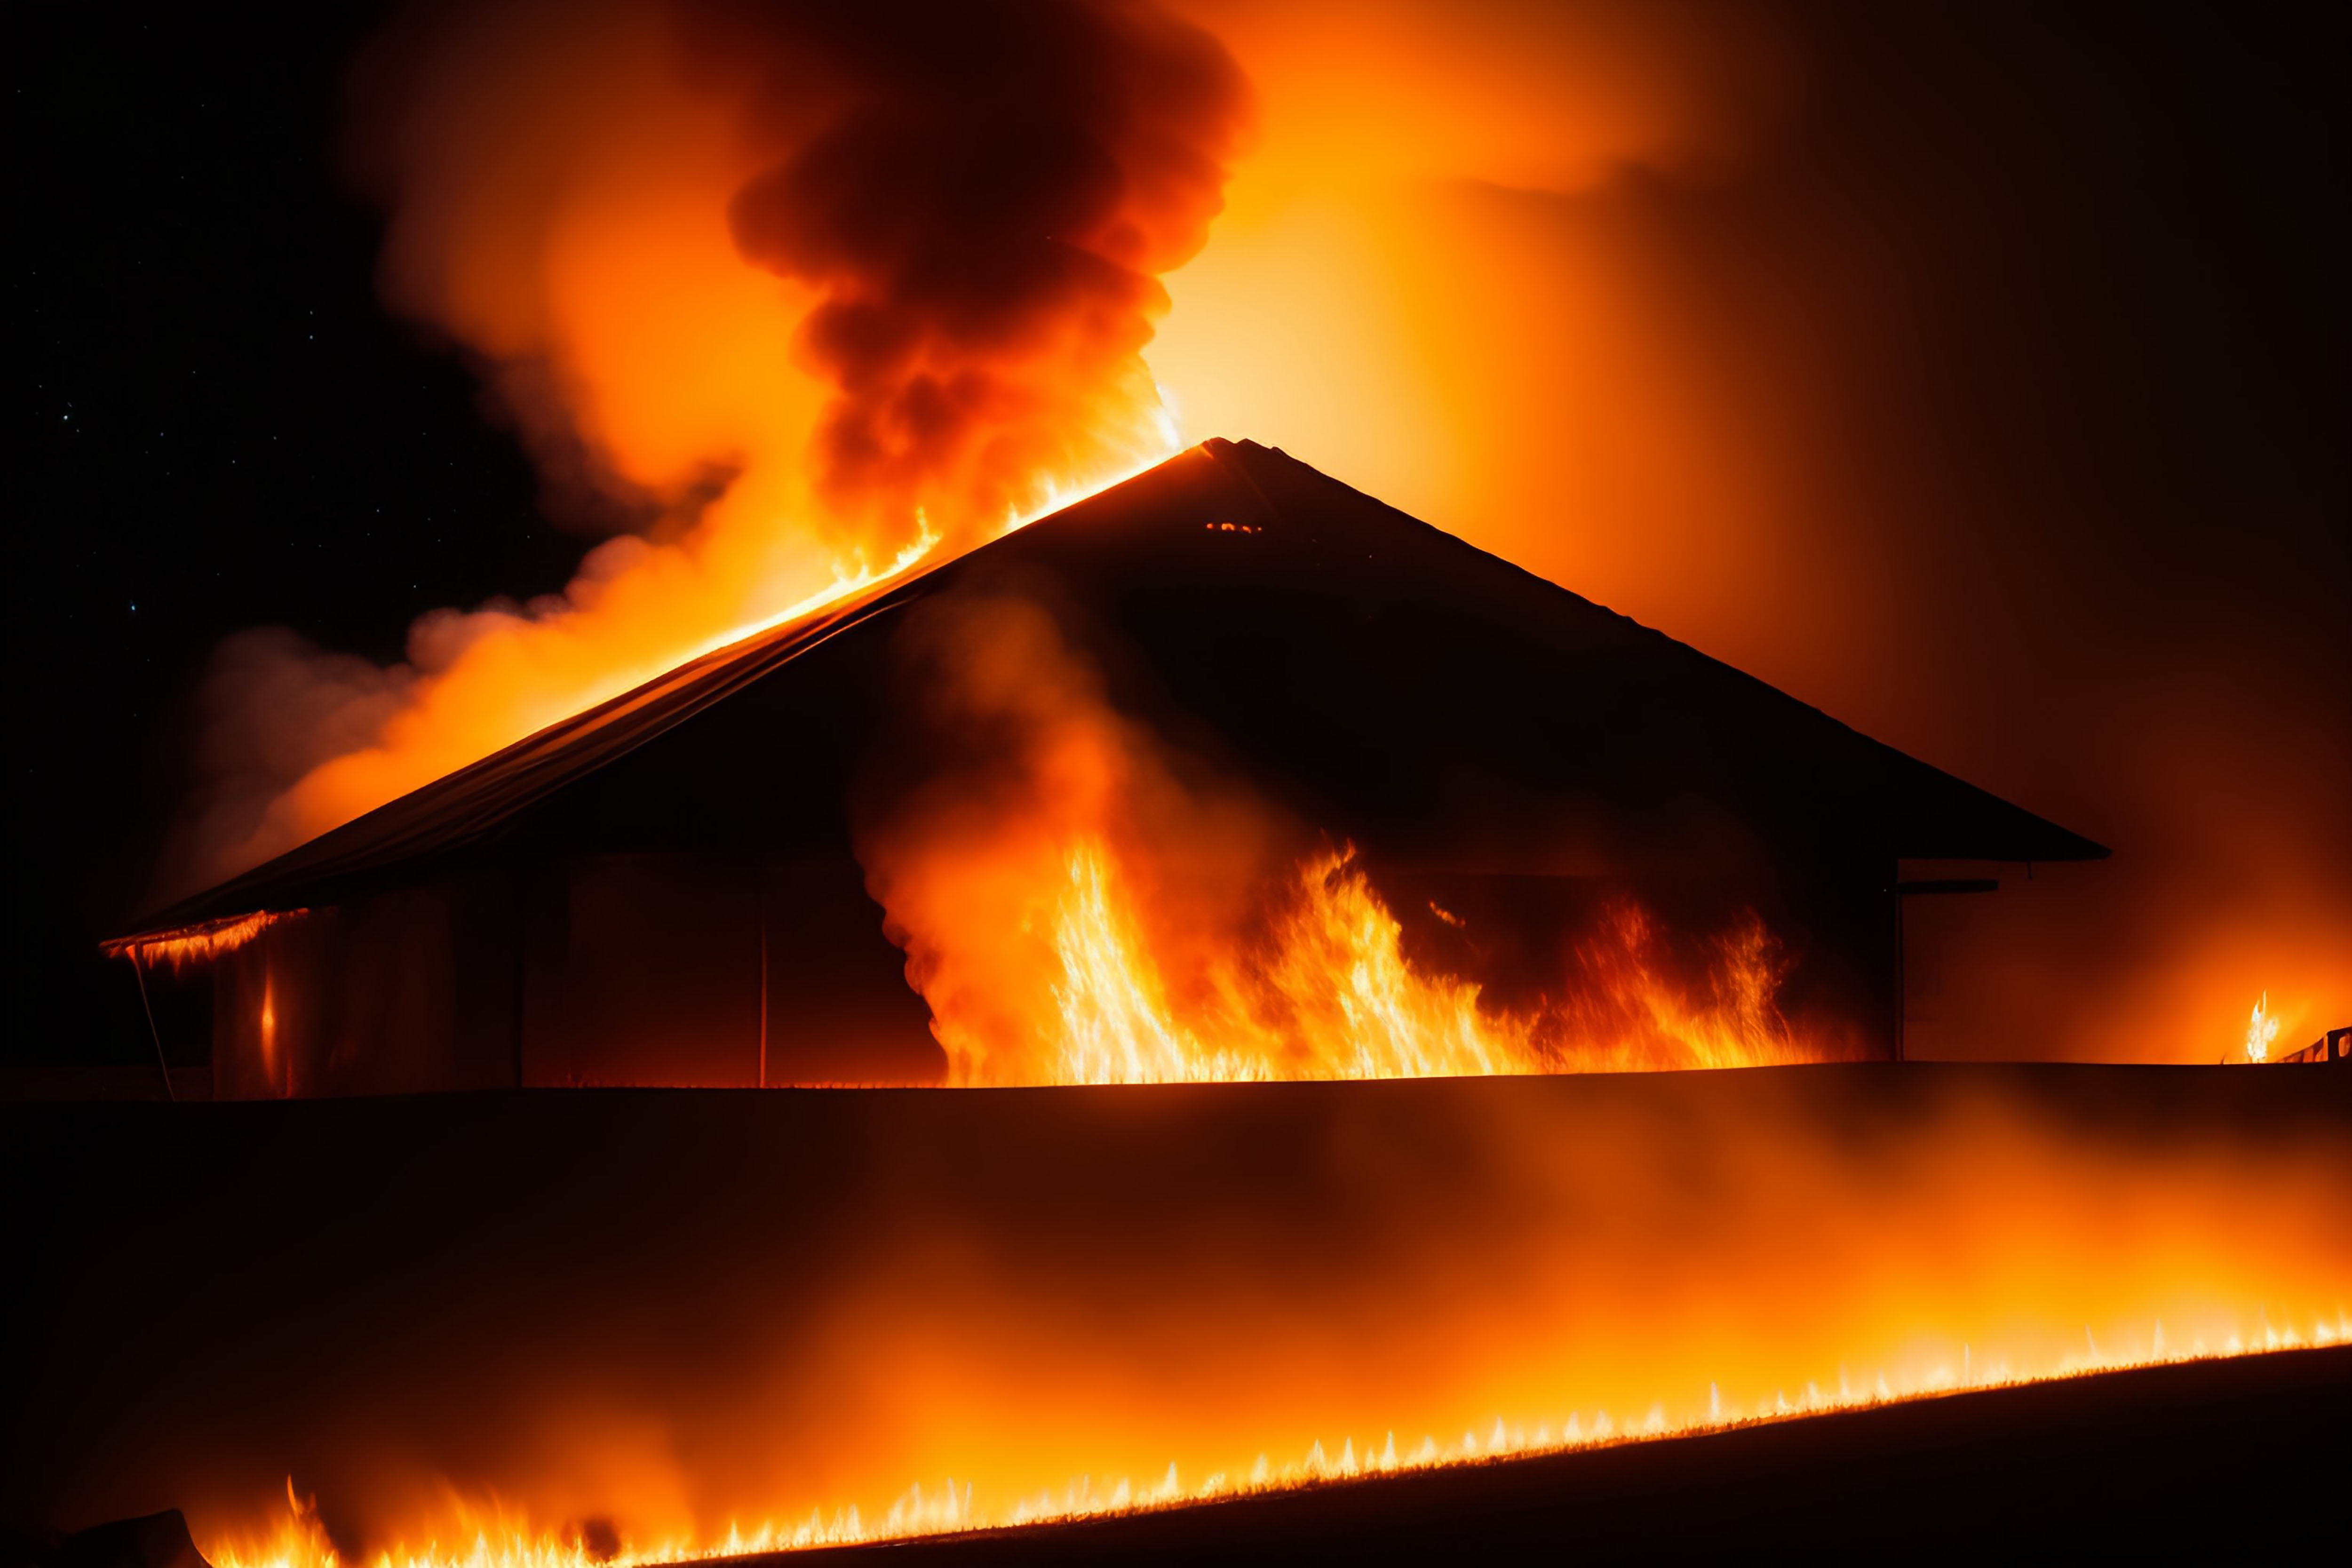 A house burning down. For illustration purposes only | Source: Freepik